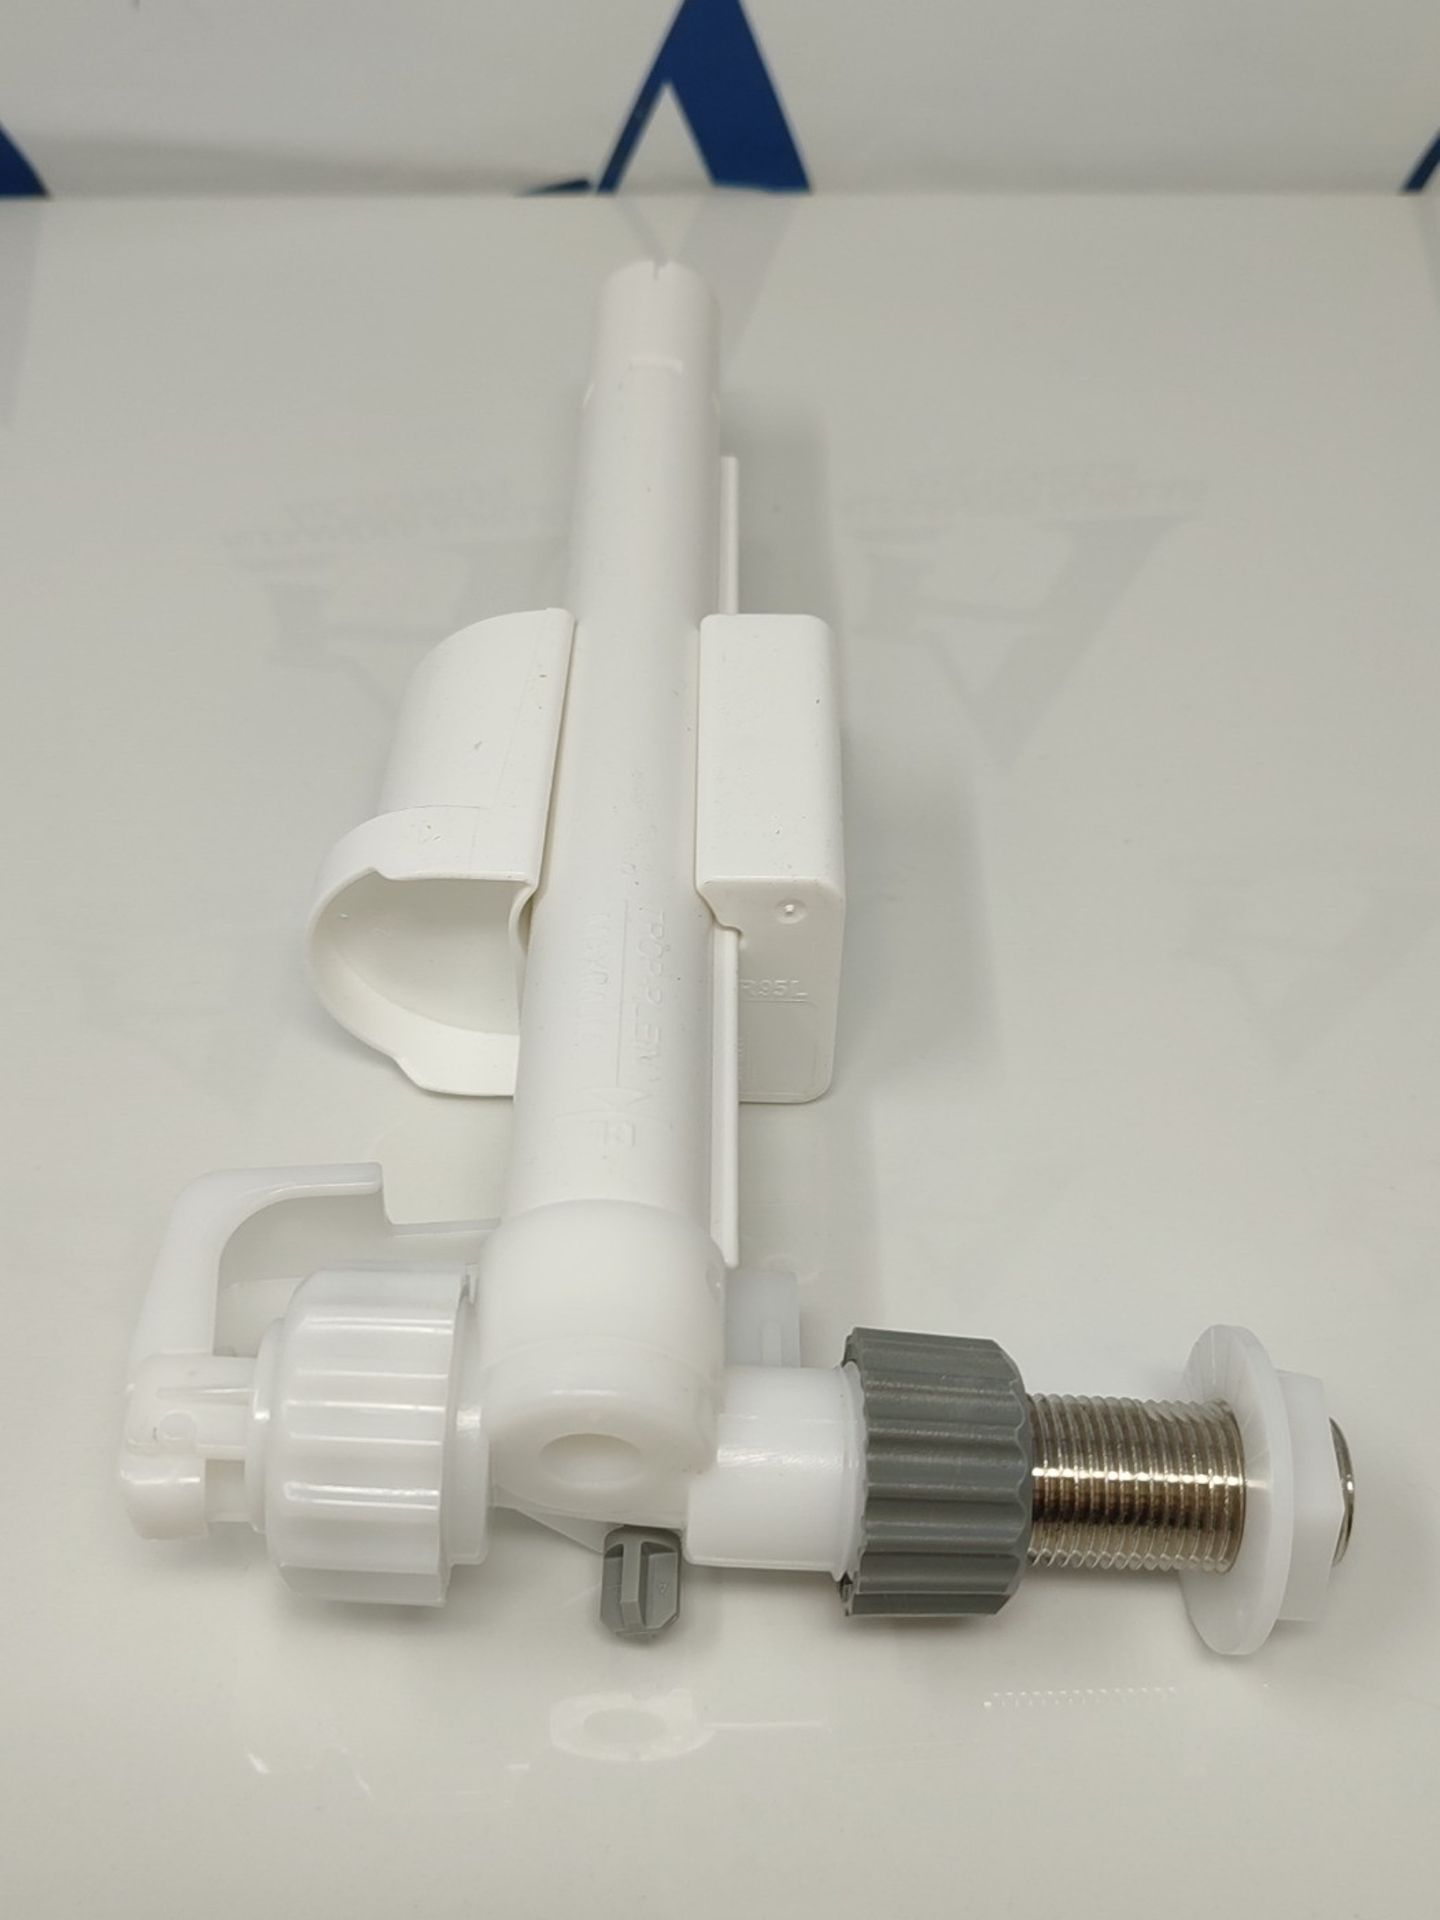 Siamp Monaco 95L 1/2" and 3/8" BSP Universal Side Inlet Cistern Fill Float Valve 30956 - Image 2 of 2